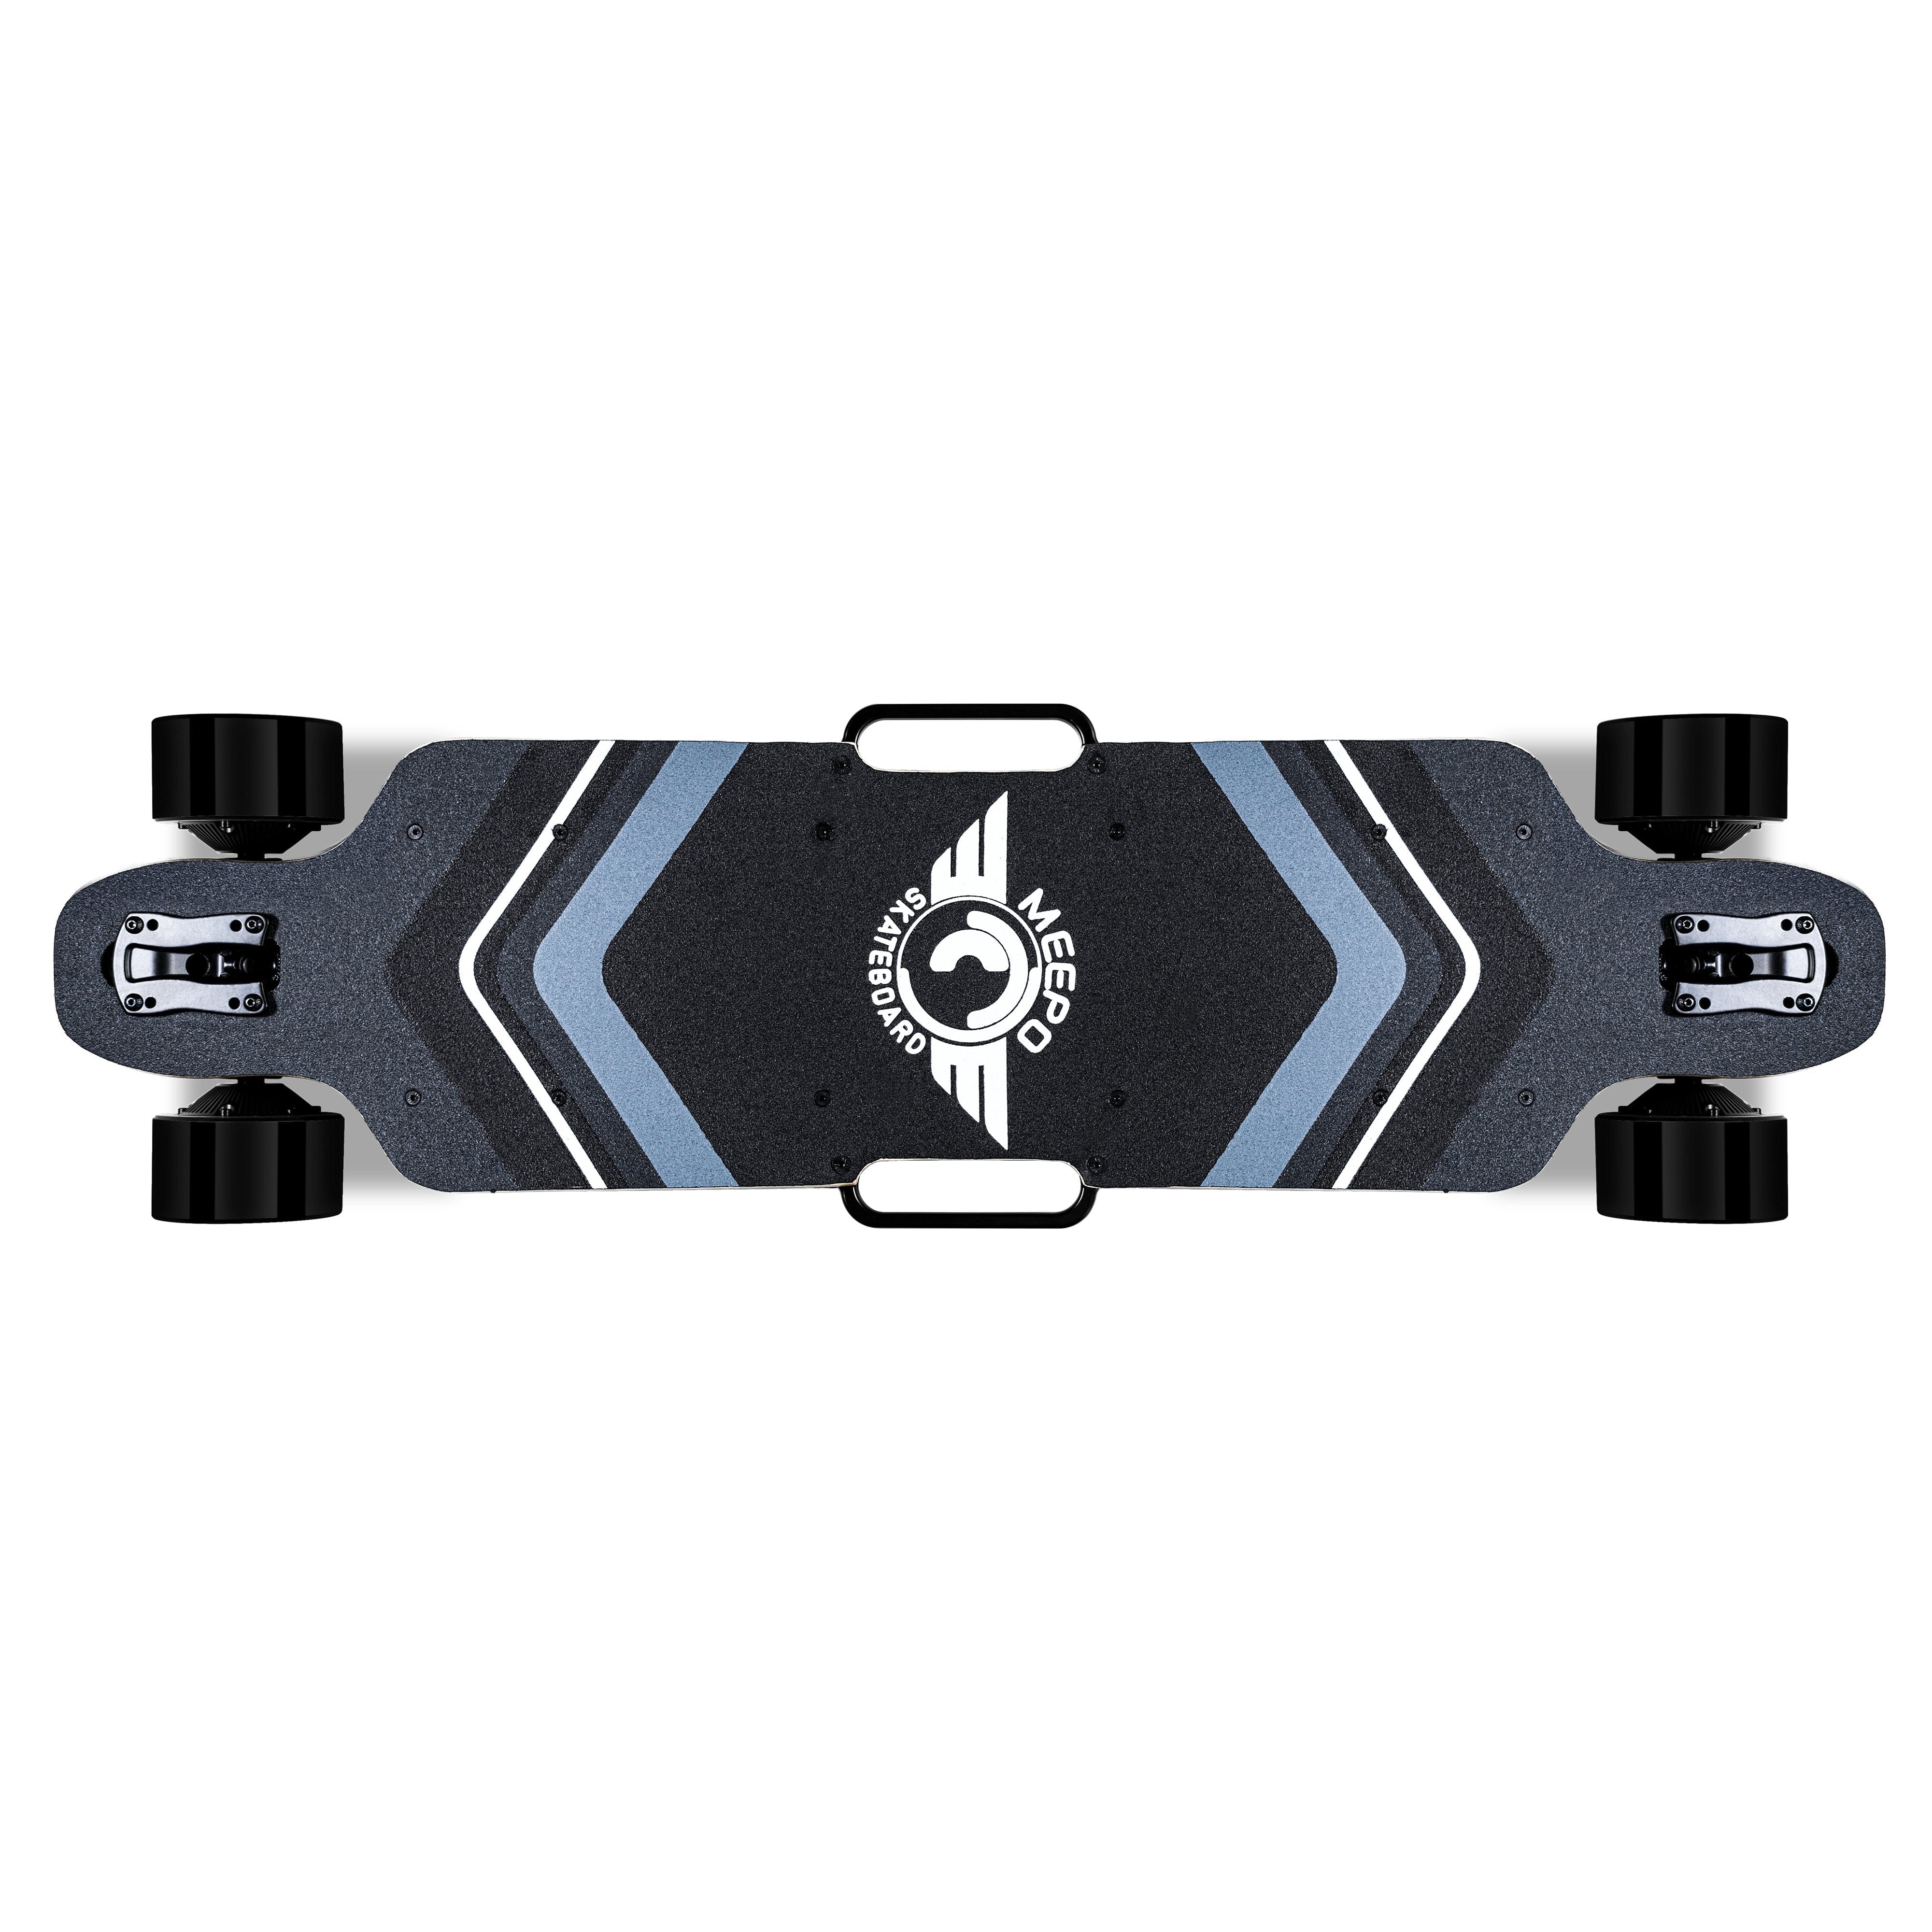 Electric Skateboards, Longboard Cruiser with Remote Control, 700W Dual  Motor,Top Speed18 MPH12Miles Range 4 Speeds Adjustment, Electric  Skateboards